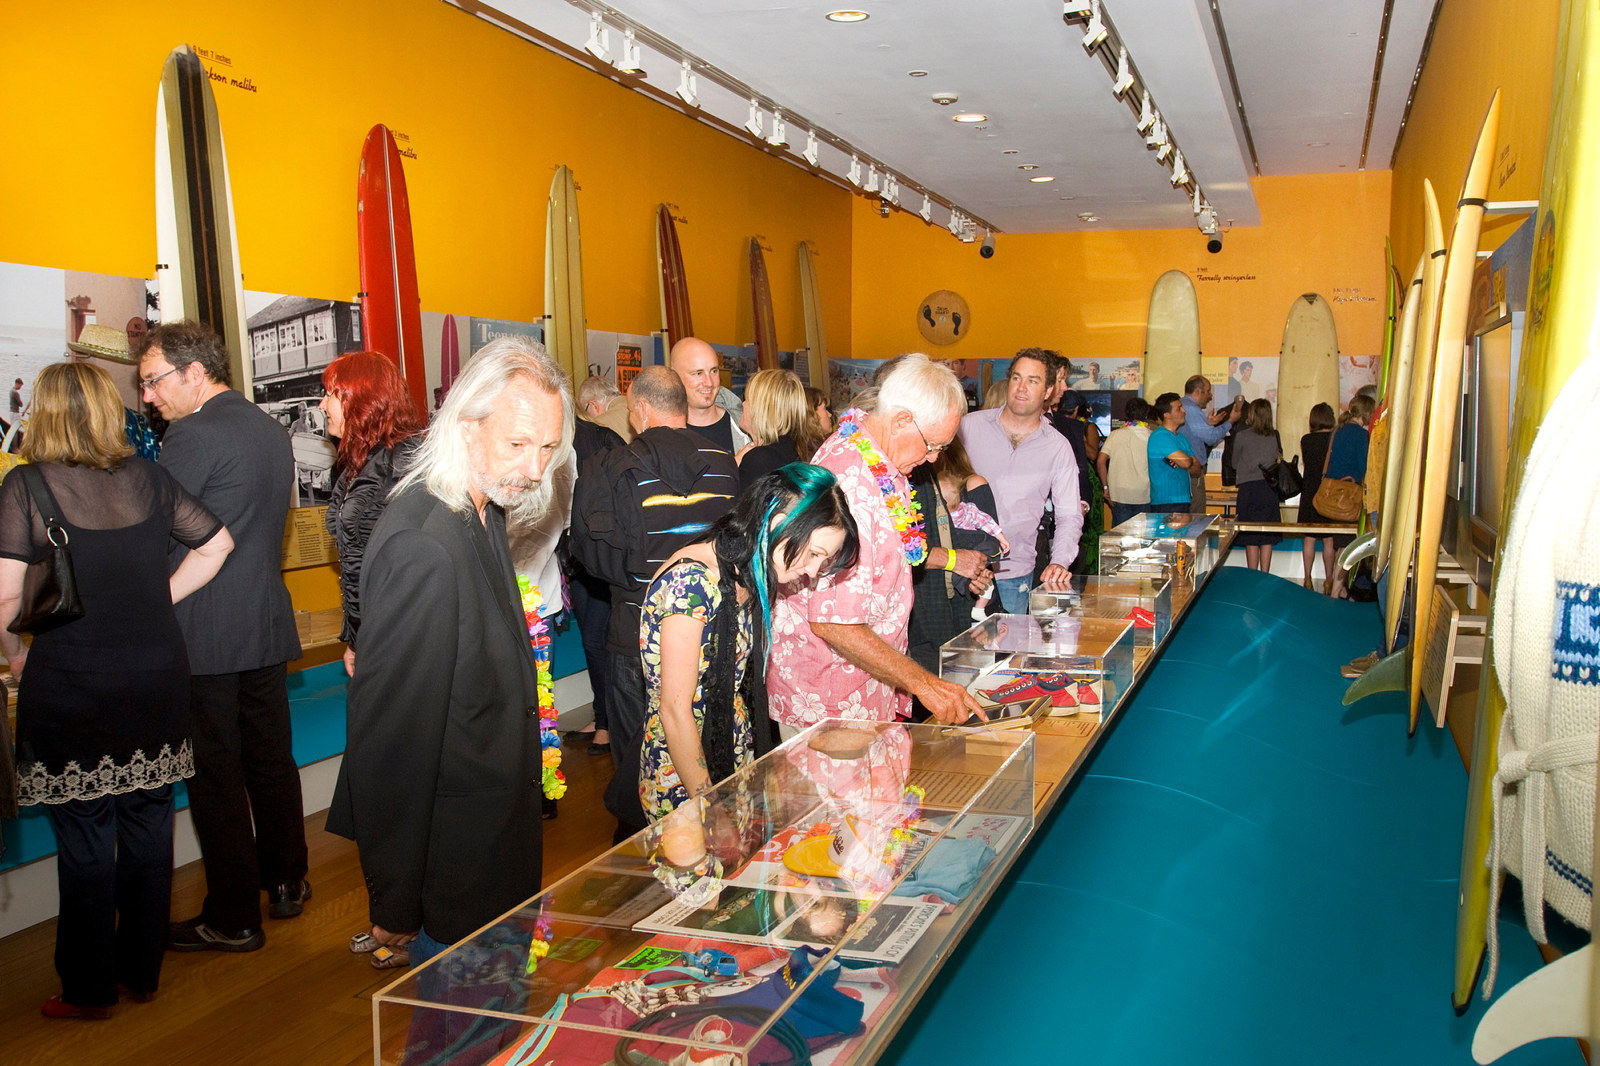 Crowds examining pieces at the Surf City exhibition opening